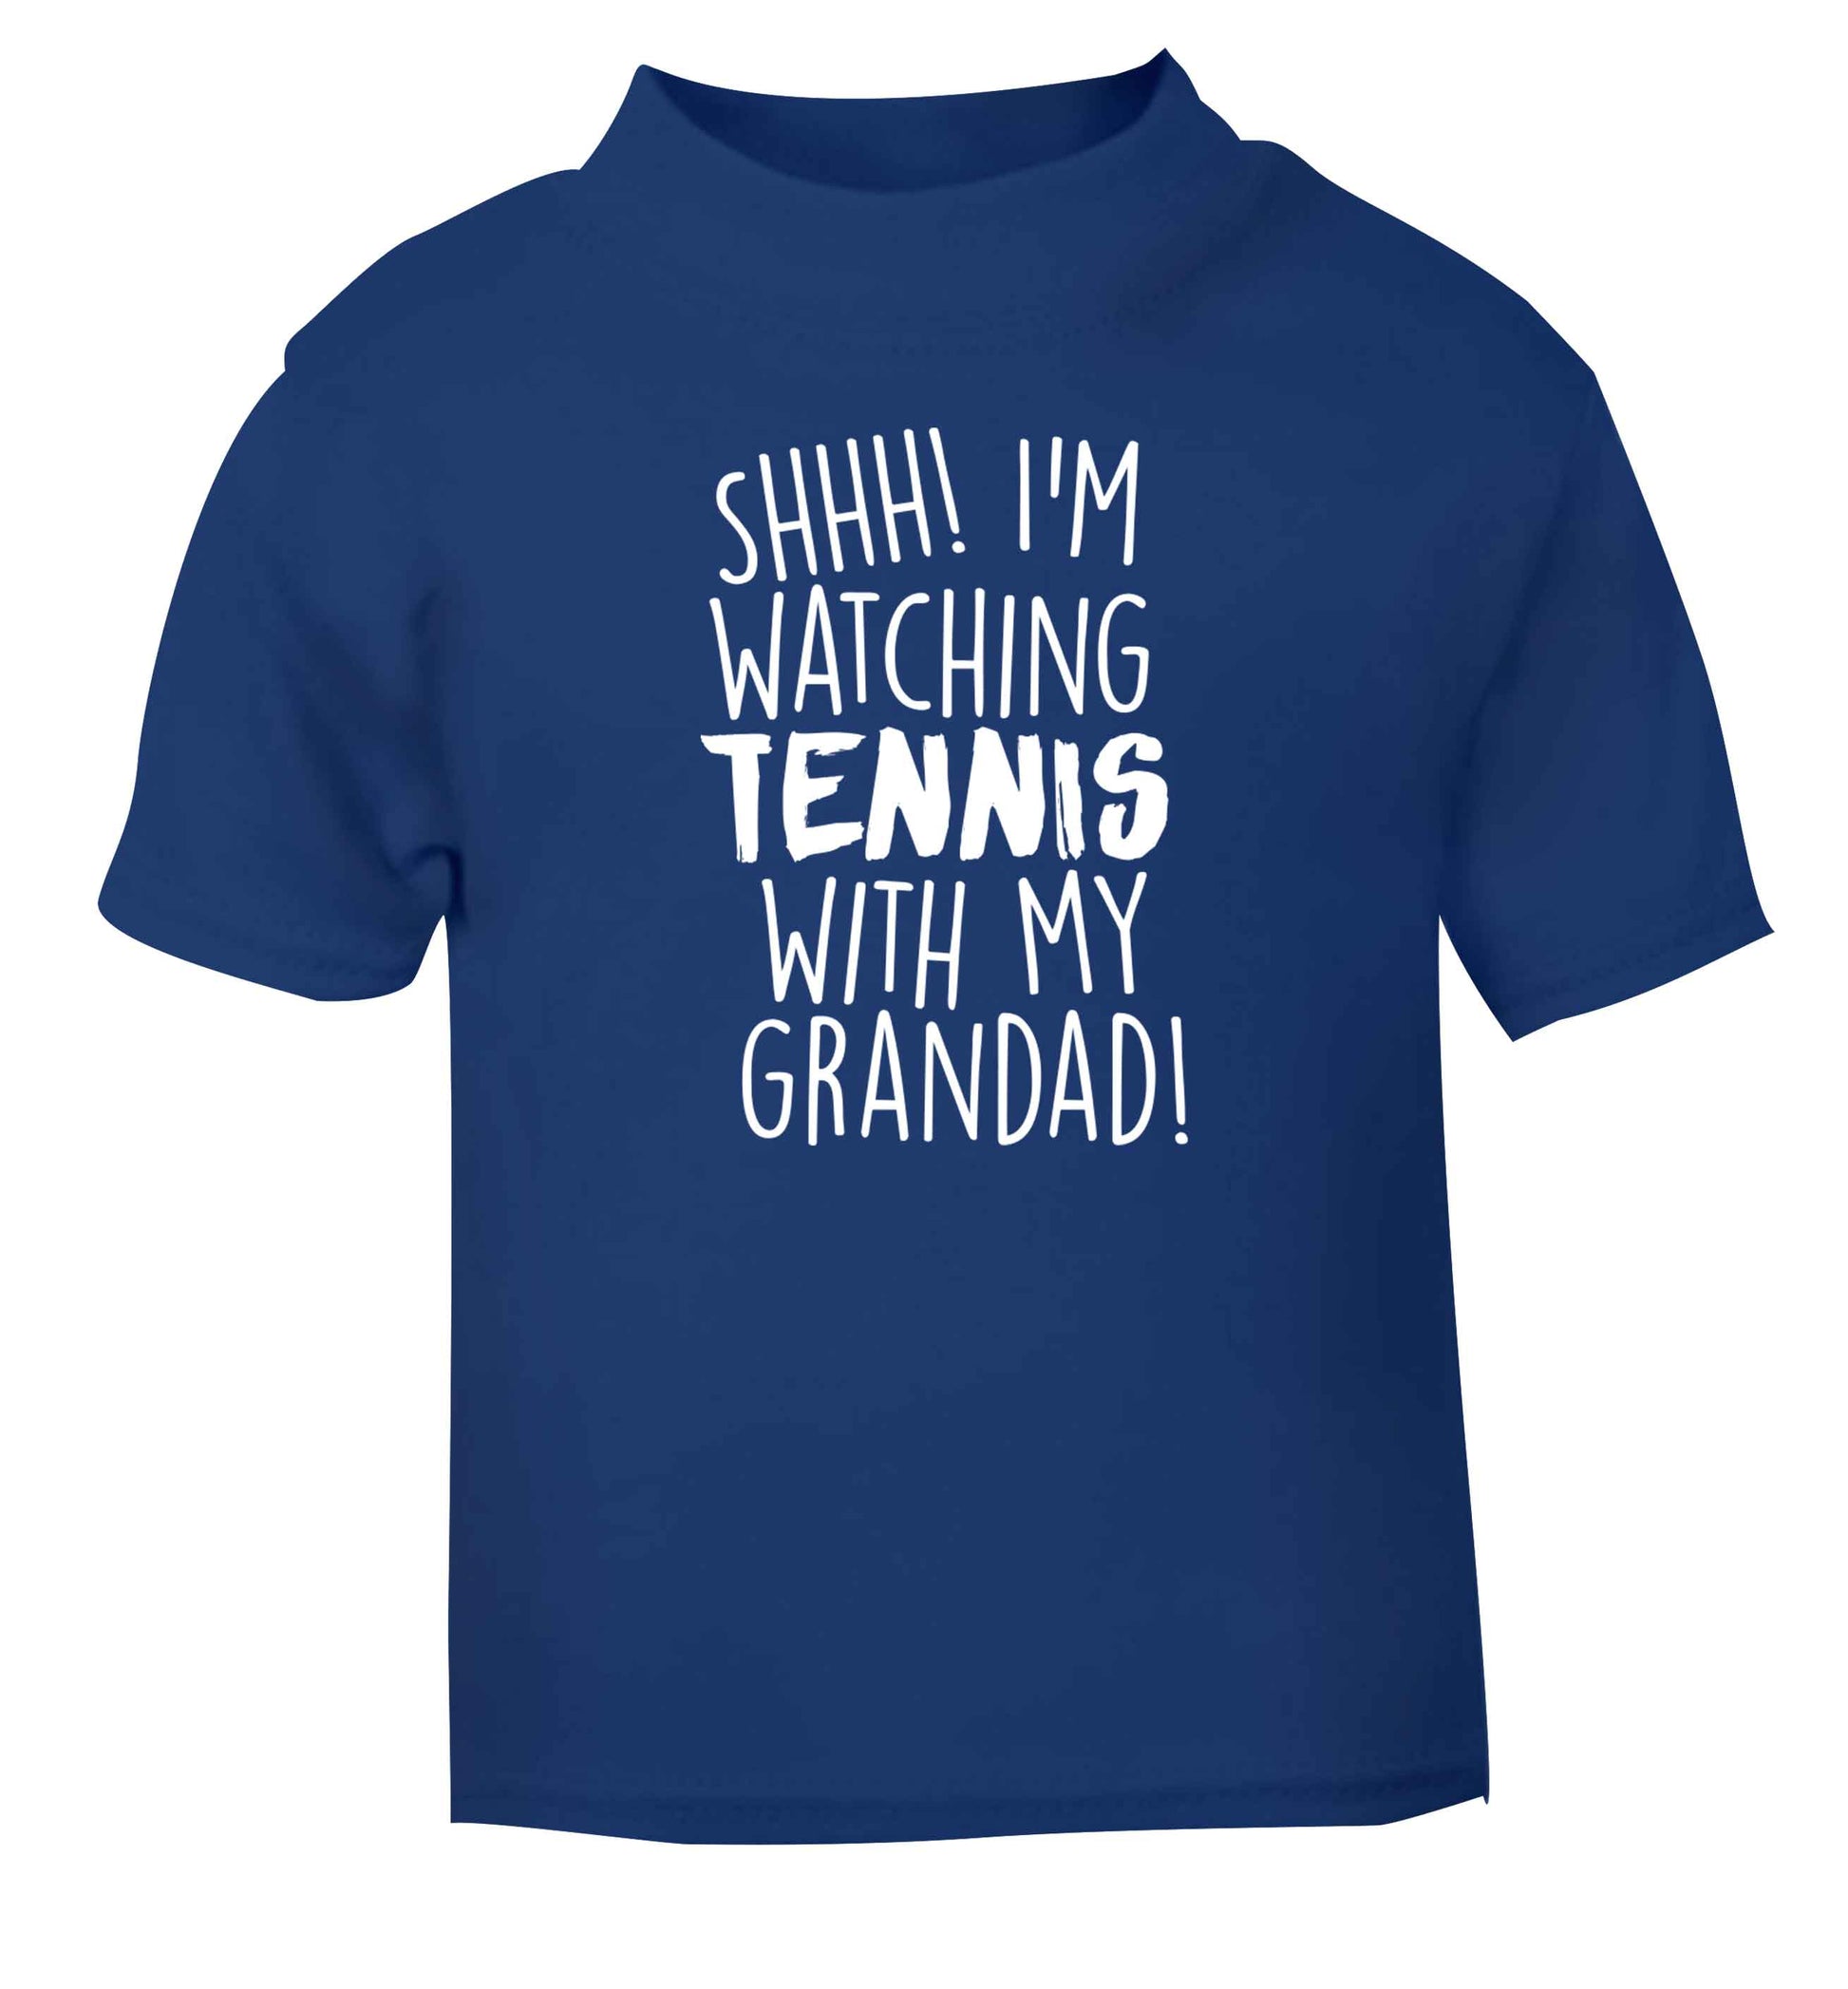 Shh! I'm watching tennis with my grandad! blue Baby Toddler Tshirt 2 Years